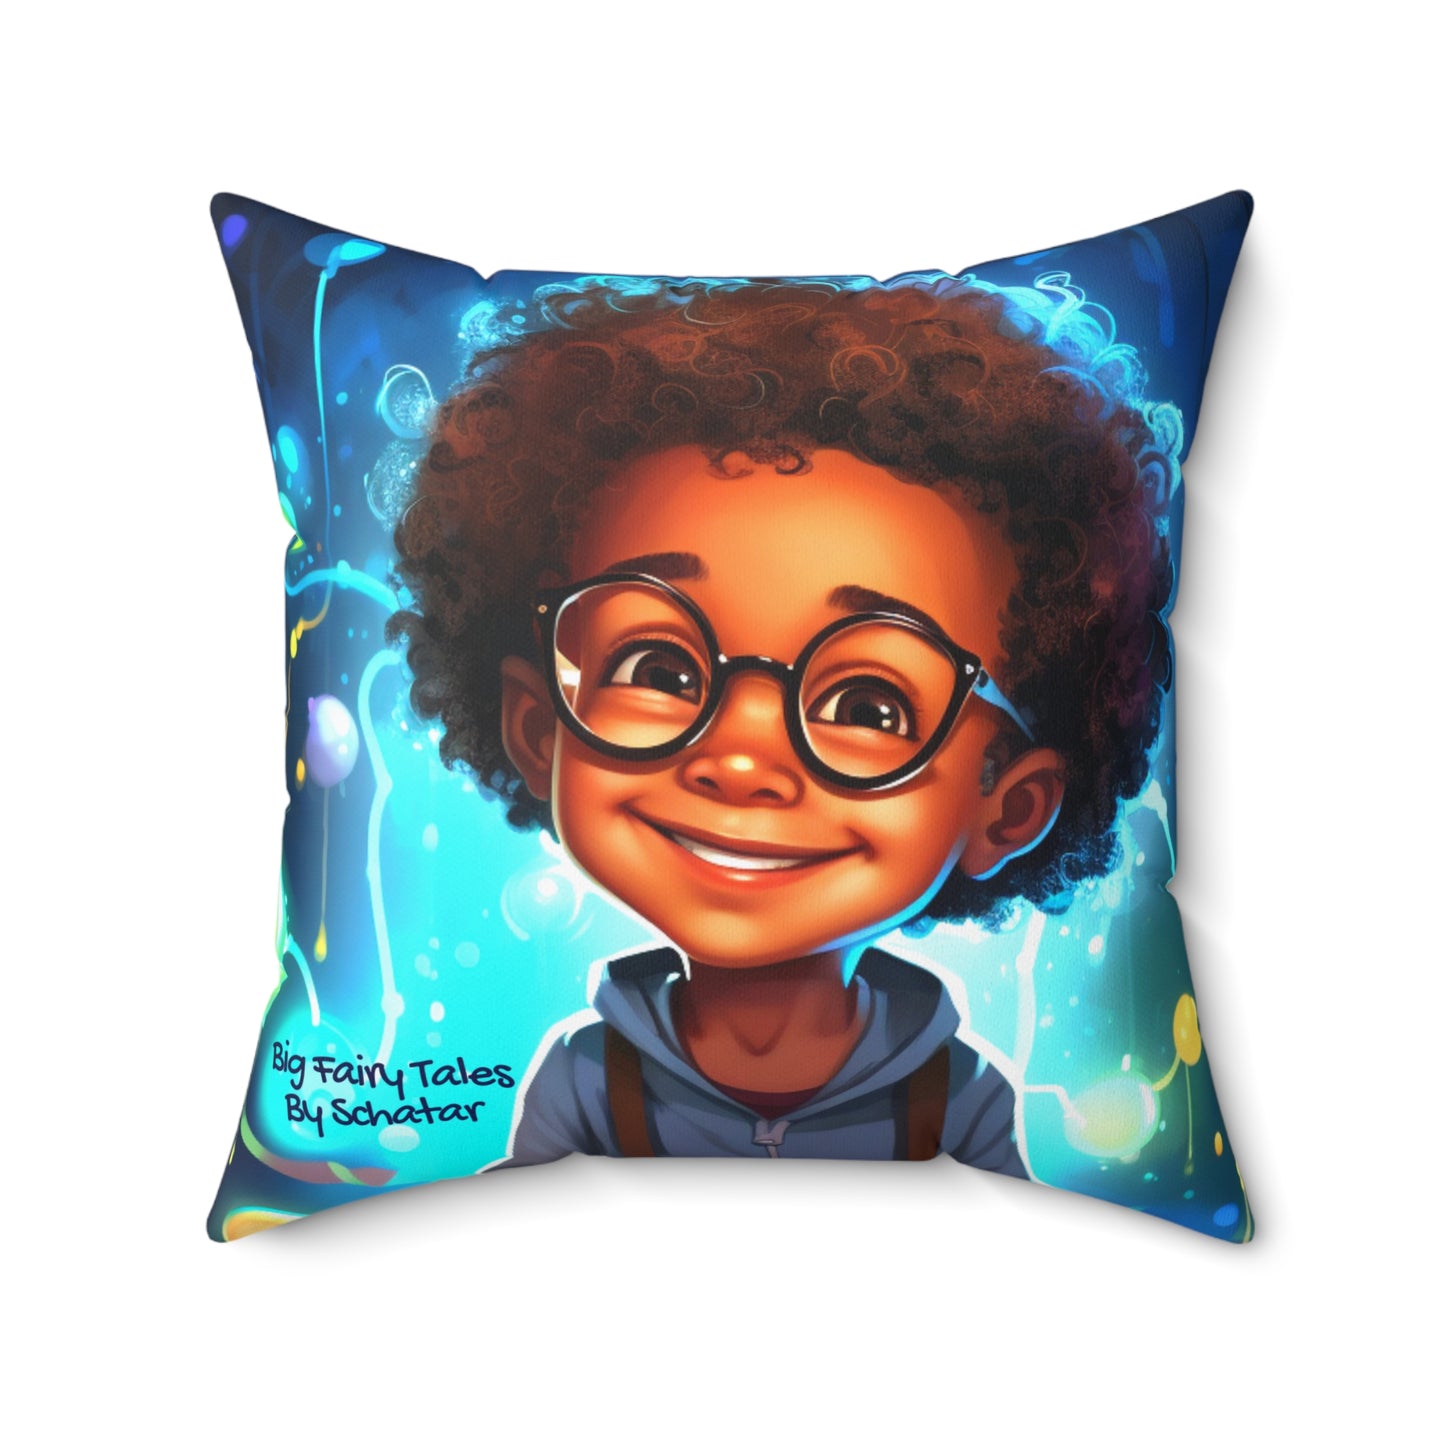 Computer Scientist - Big Little Professionals Plush Pillow 2 From Big Fairy Tales By Schatar